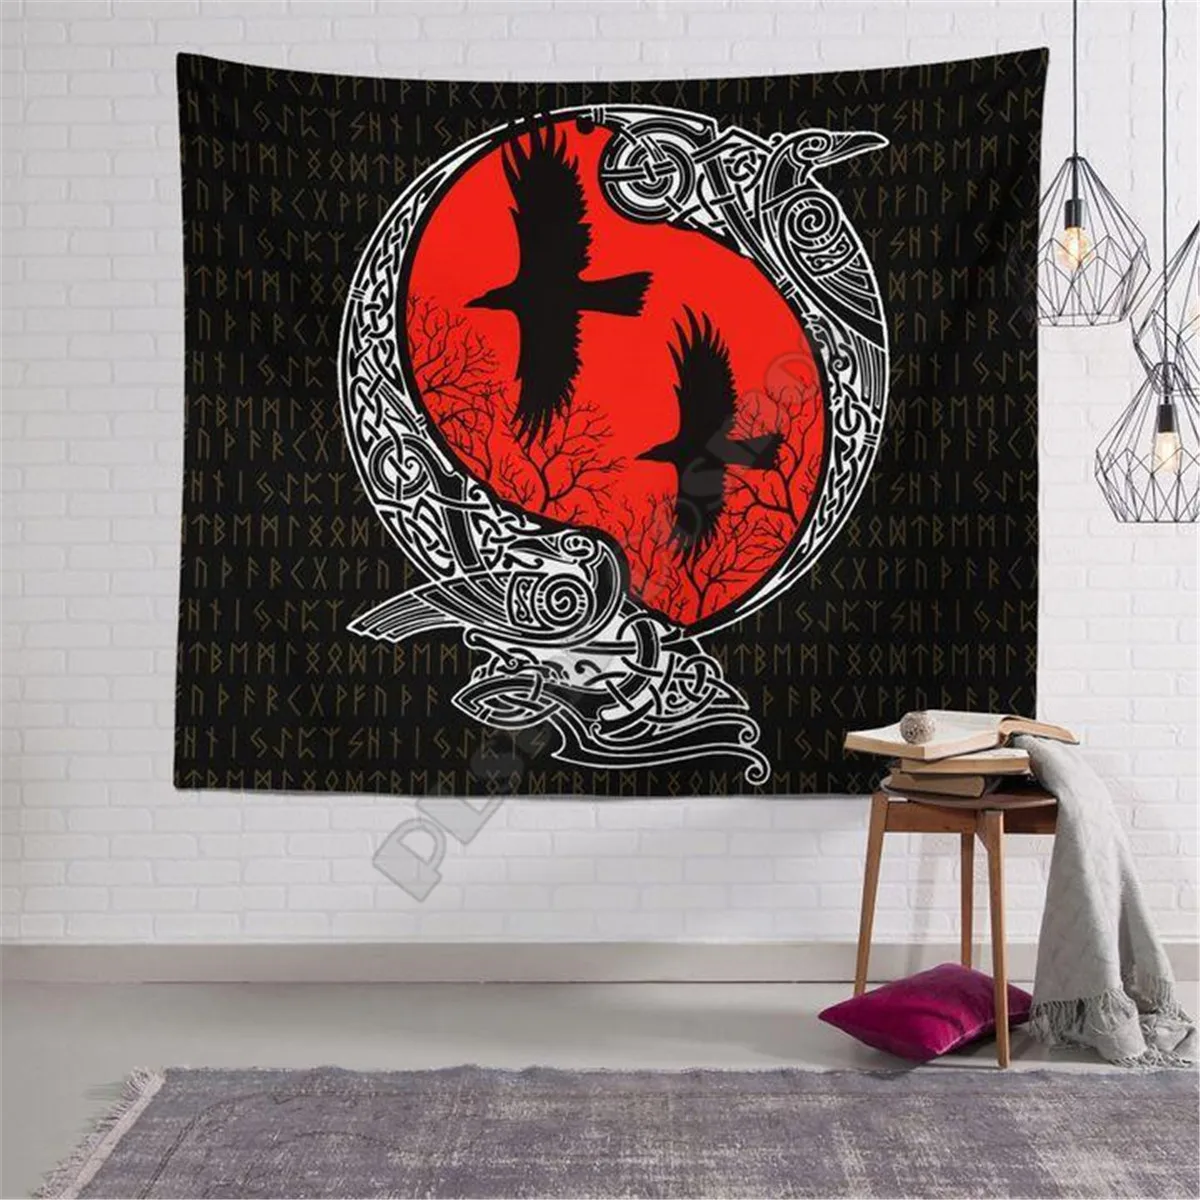 

Viking Legend Warrior Limited 3D Print Wall Tapestry Rectangular Home Decor Wall Hanging Home Decoration 03